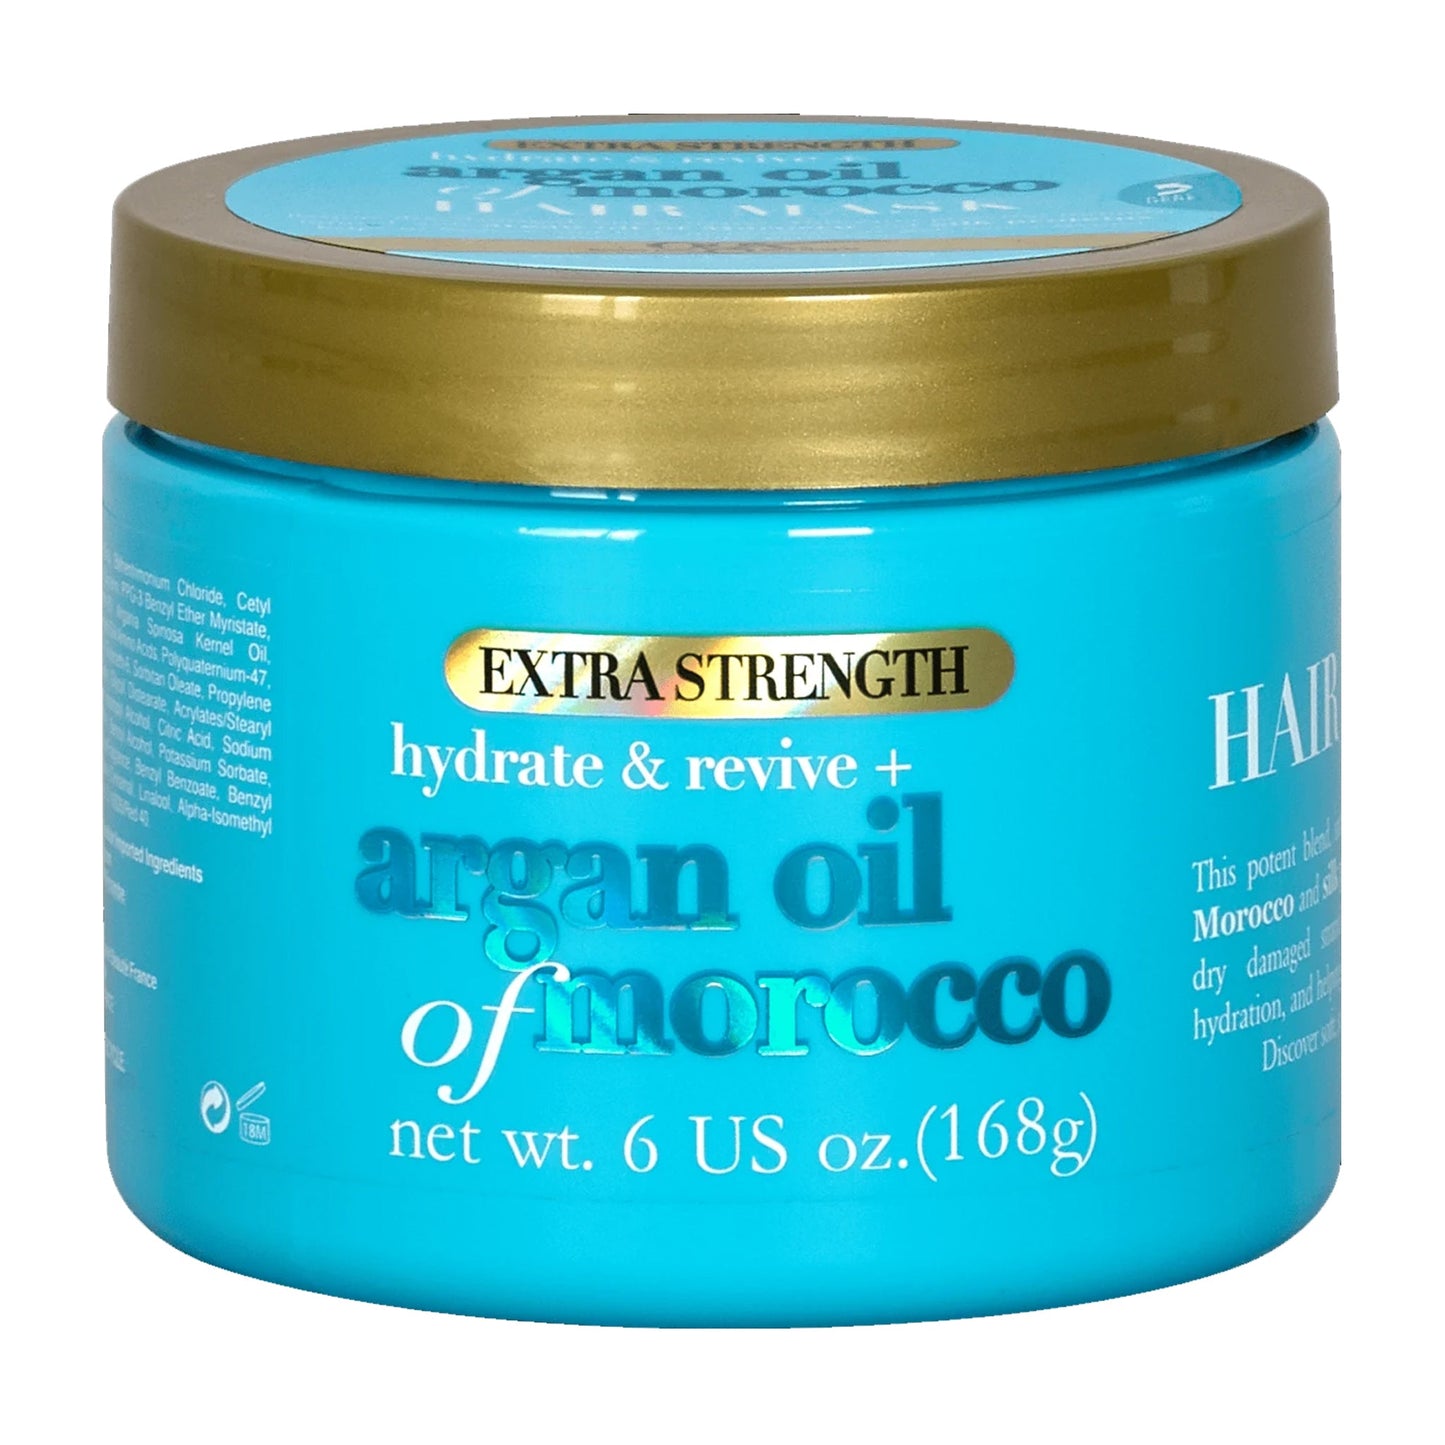 OGX - EXTRA STRENGTH HYDRATE & RENEW+ ARGAN OIL OF MOROCCO HAIR MASK - 168G